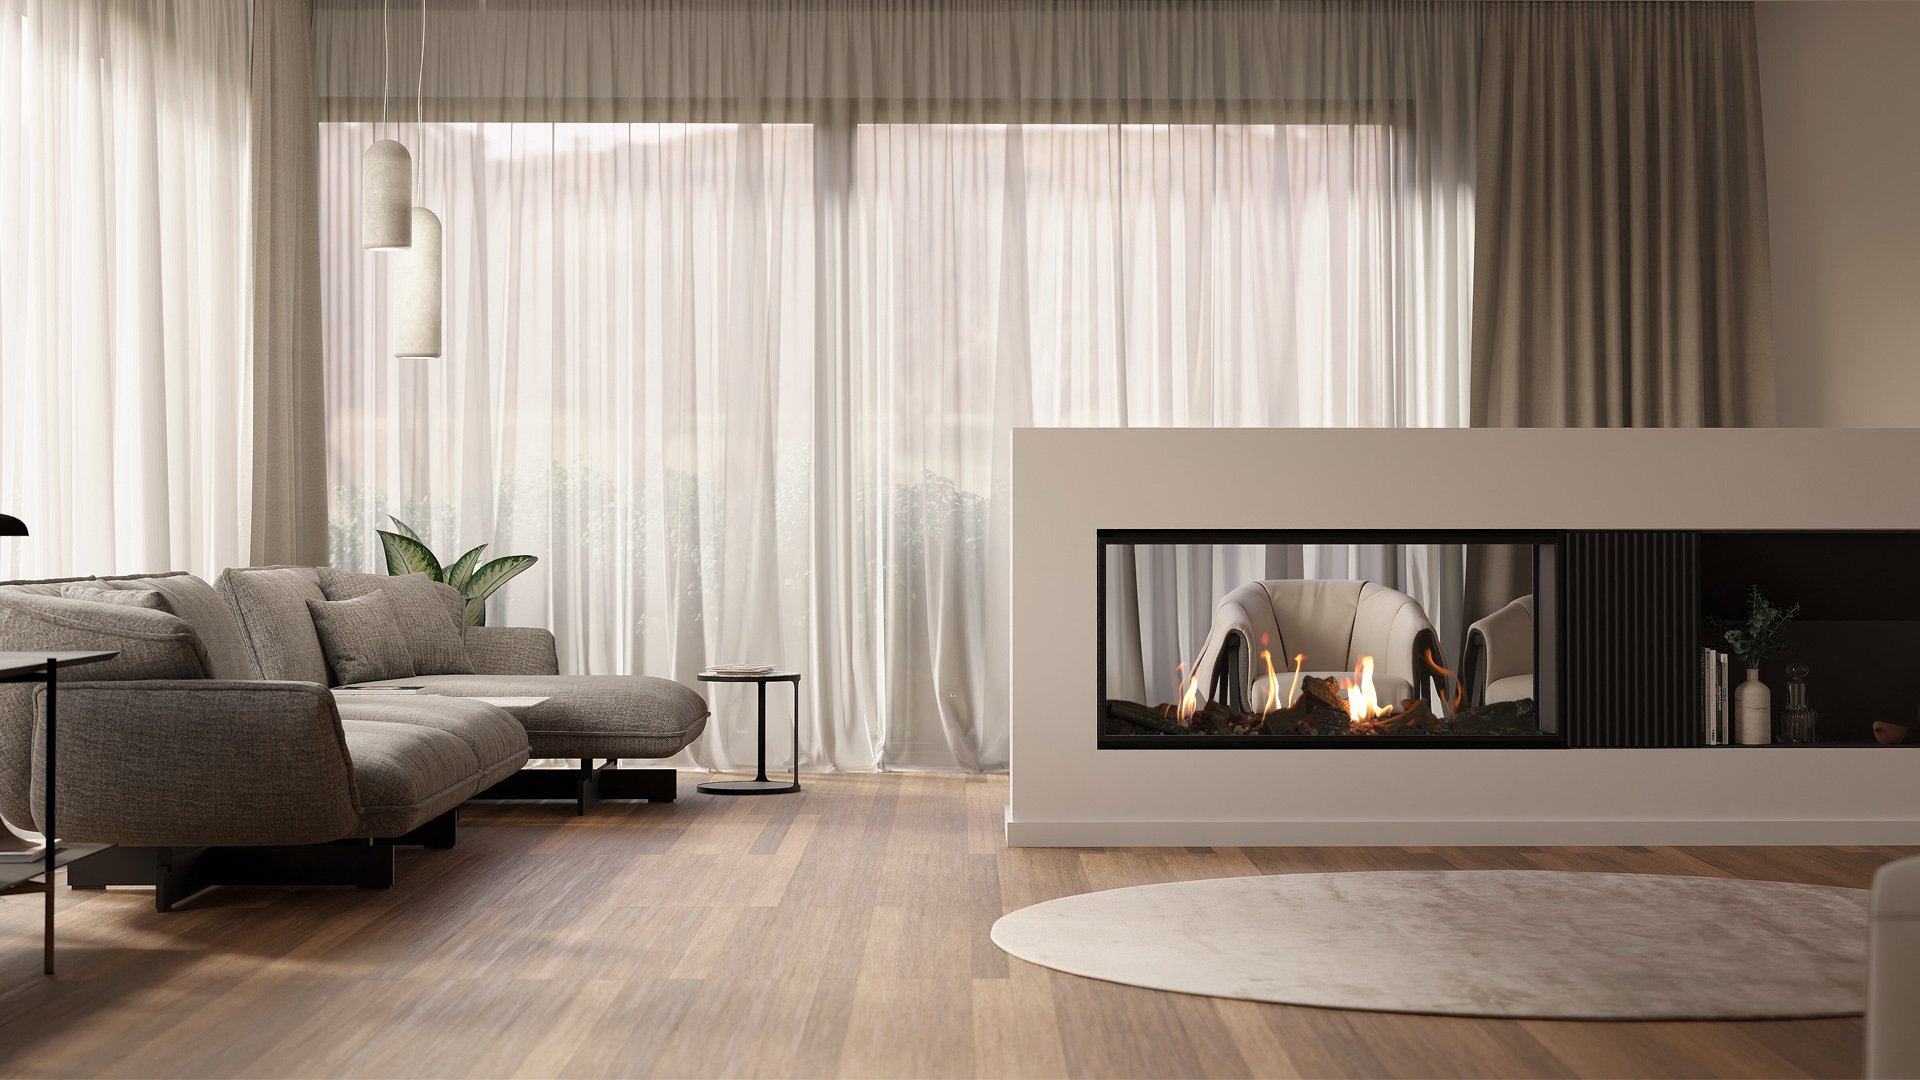 Embracing Design Freedom with Escea Fireplaces